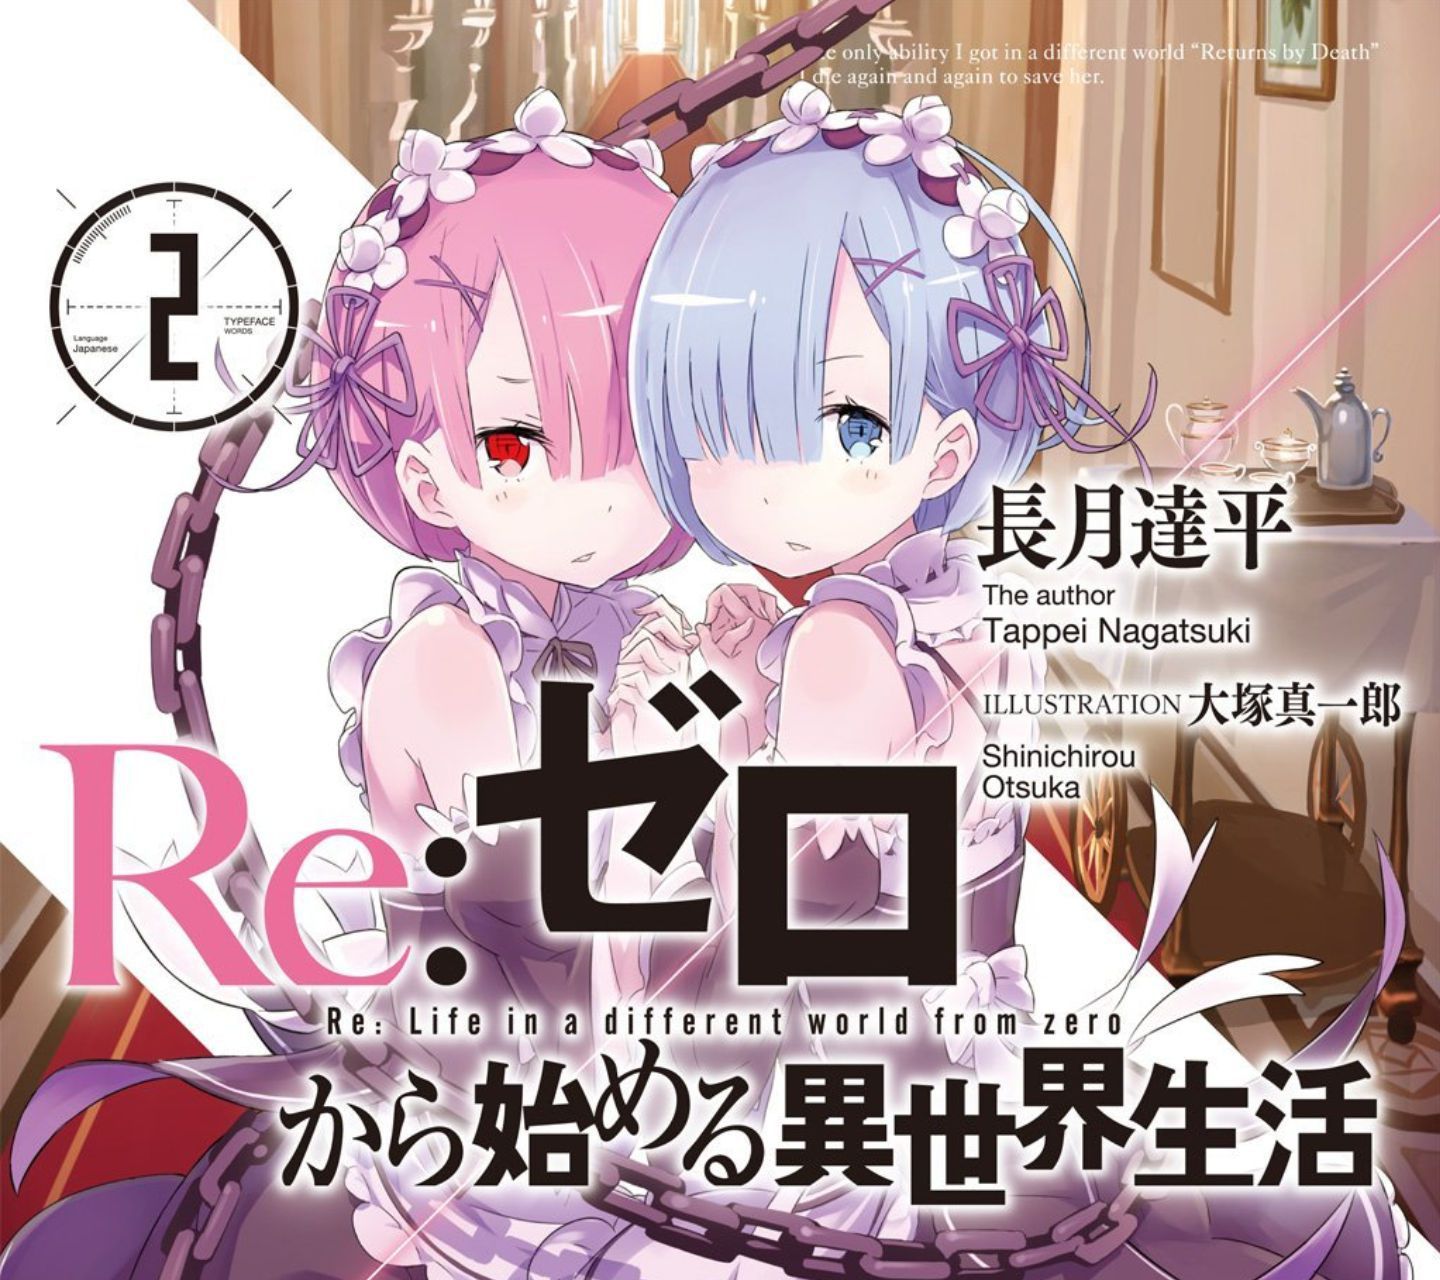 Re ゼロから始める異世界生活 Android壁紙 1 アニメ壁紙ネット Pc Android Iphone壁紙 画像